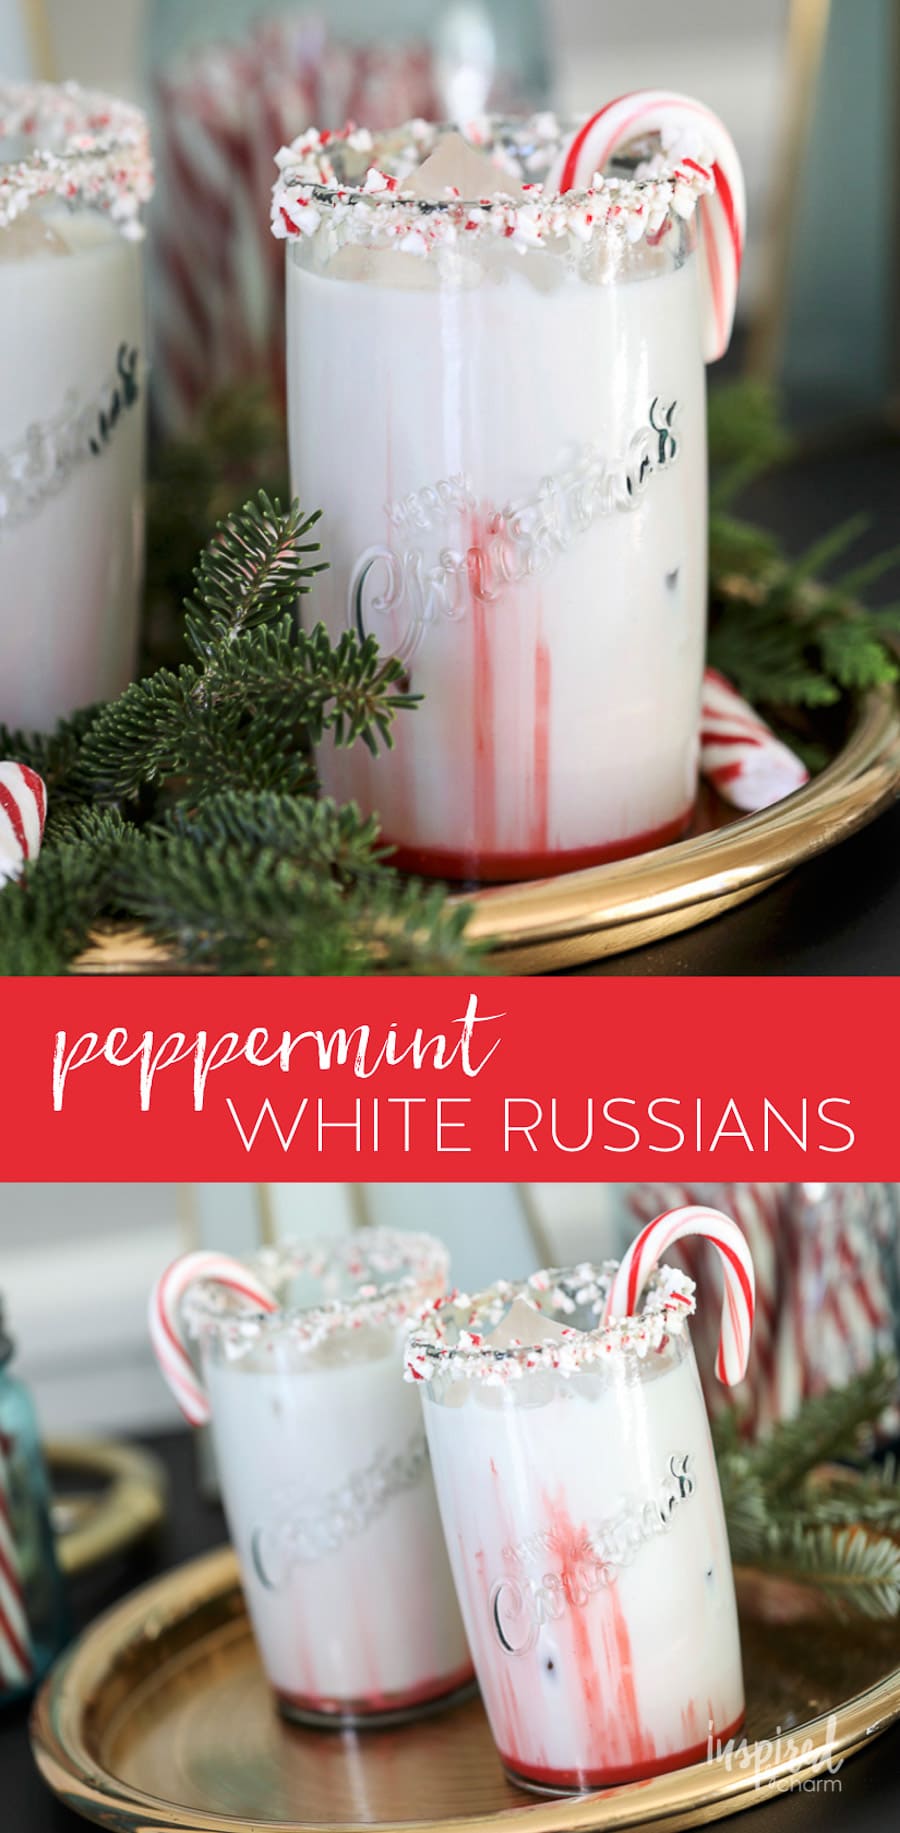 Delicious Peppermint White Russian Christmas cocktail recipe for Christmas! #christmas #holiday #cocktail #recipe #whiterussian #peppermint